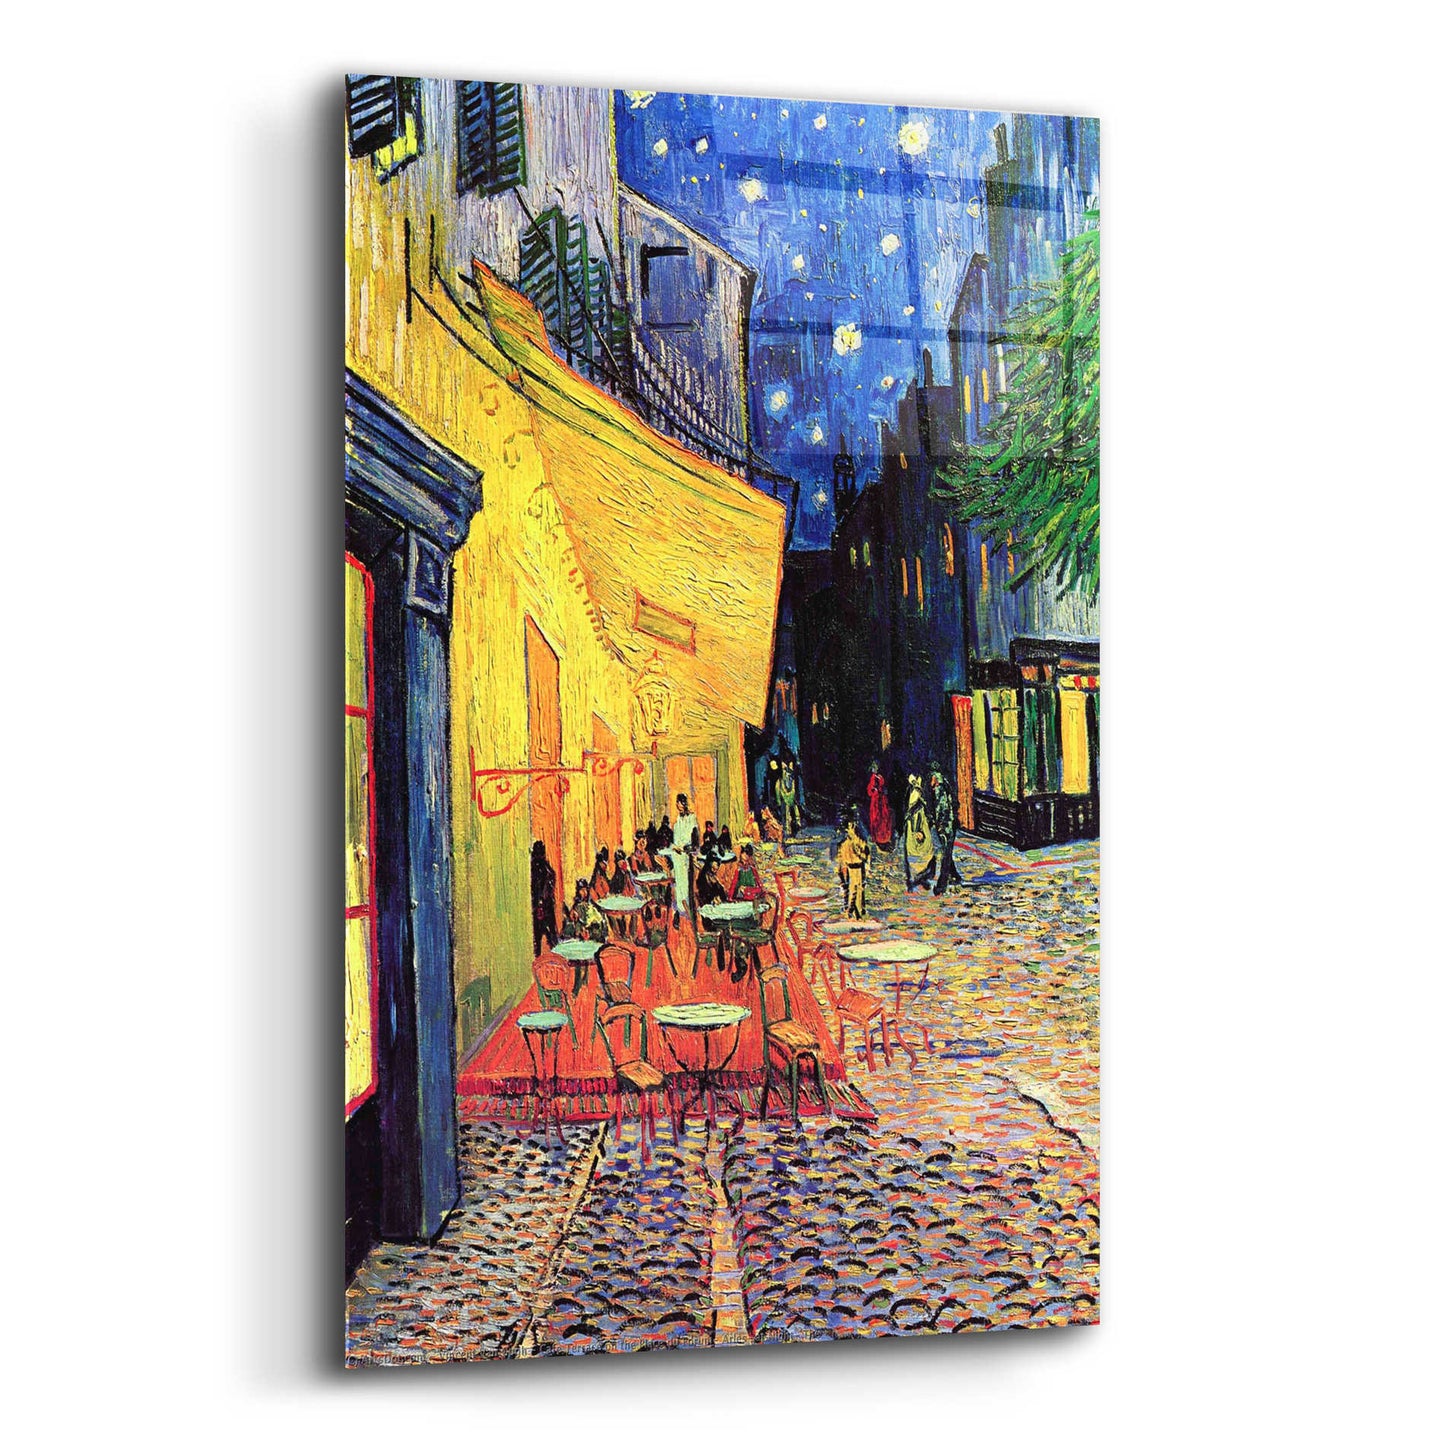 Epic Art 'Cafe Terrace at Night' by Vincent van Gogh, Acrylic Glass Wall Art,12x16